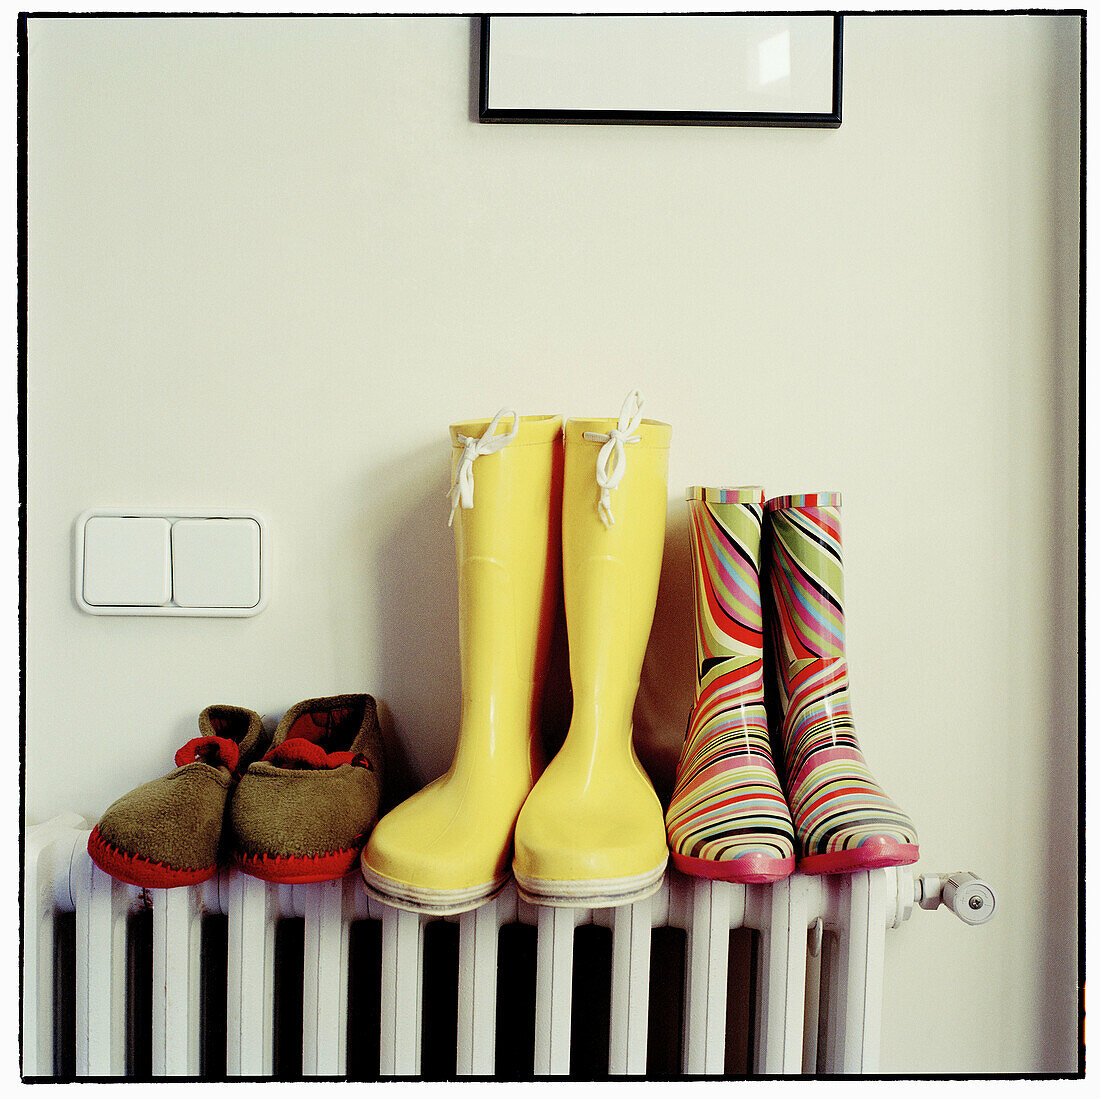  Arrangement, Color, Colour, Concept, Concepts, Different, Footgear, Footwear, Indoor, Indoors, Inside, Interior, Order, Pair, Pairs, Radiator, Radiators, Rubber boot, Rubber boots, Still life, Style, Three, Weather, B75-414946, agefotostock 